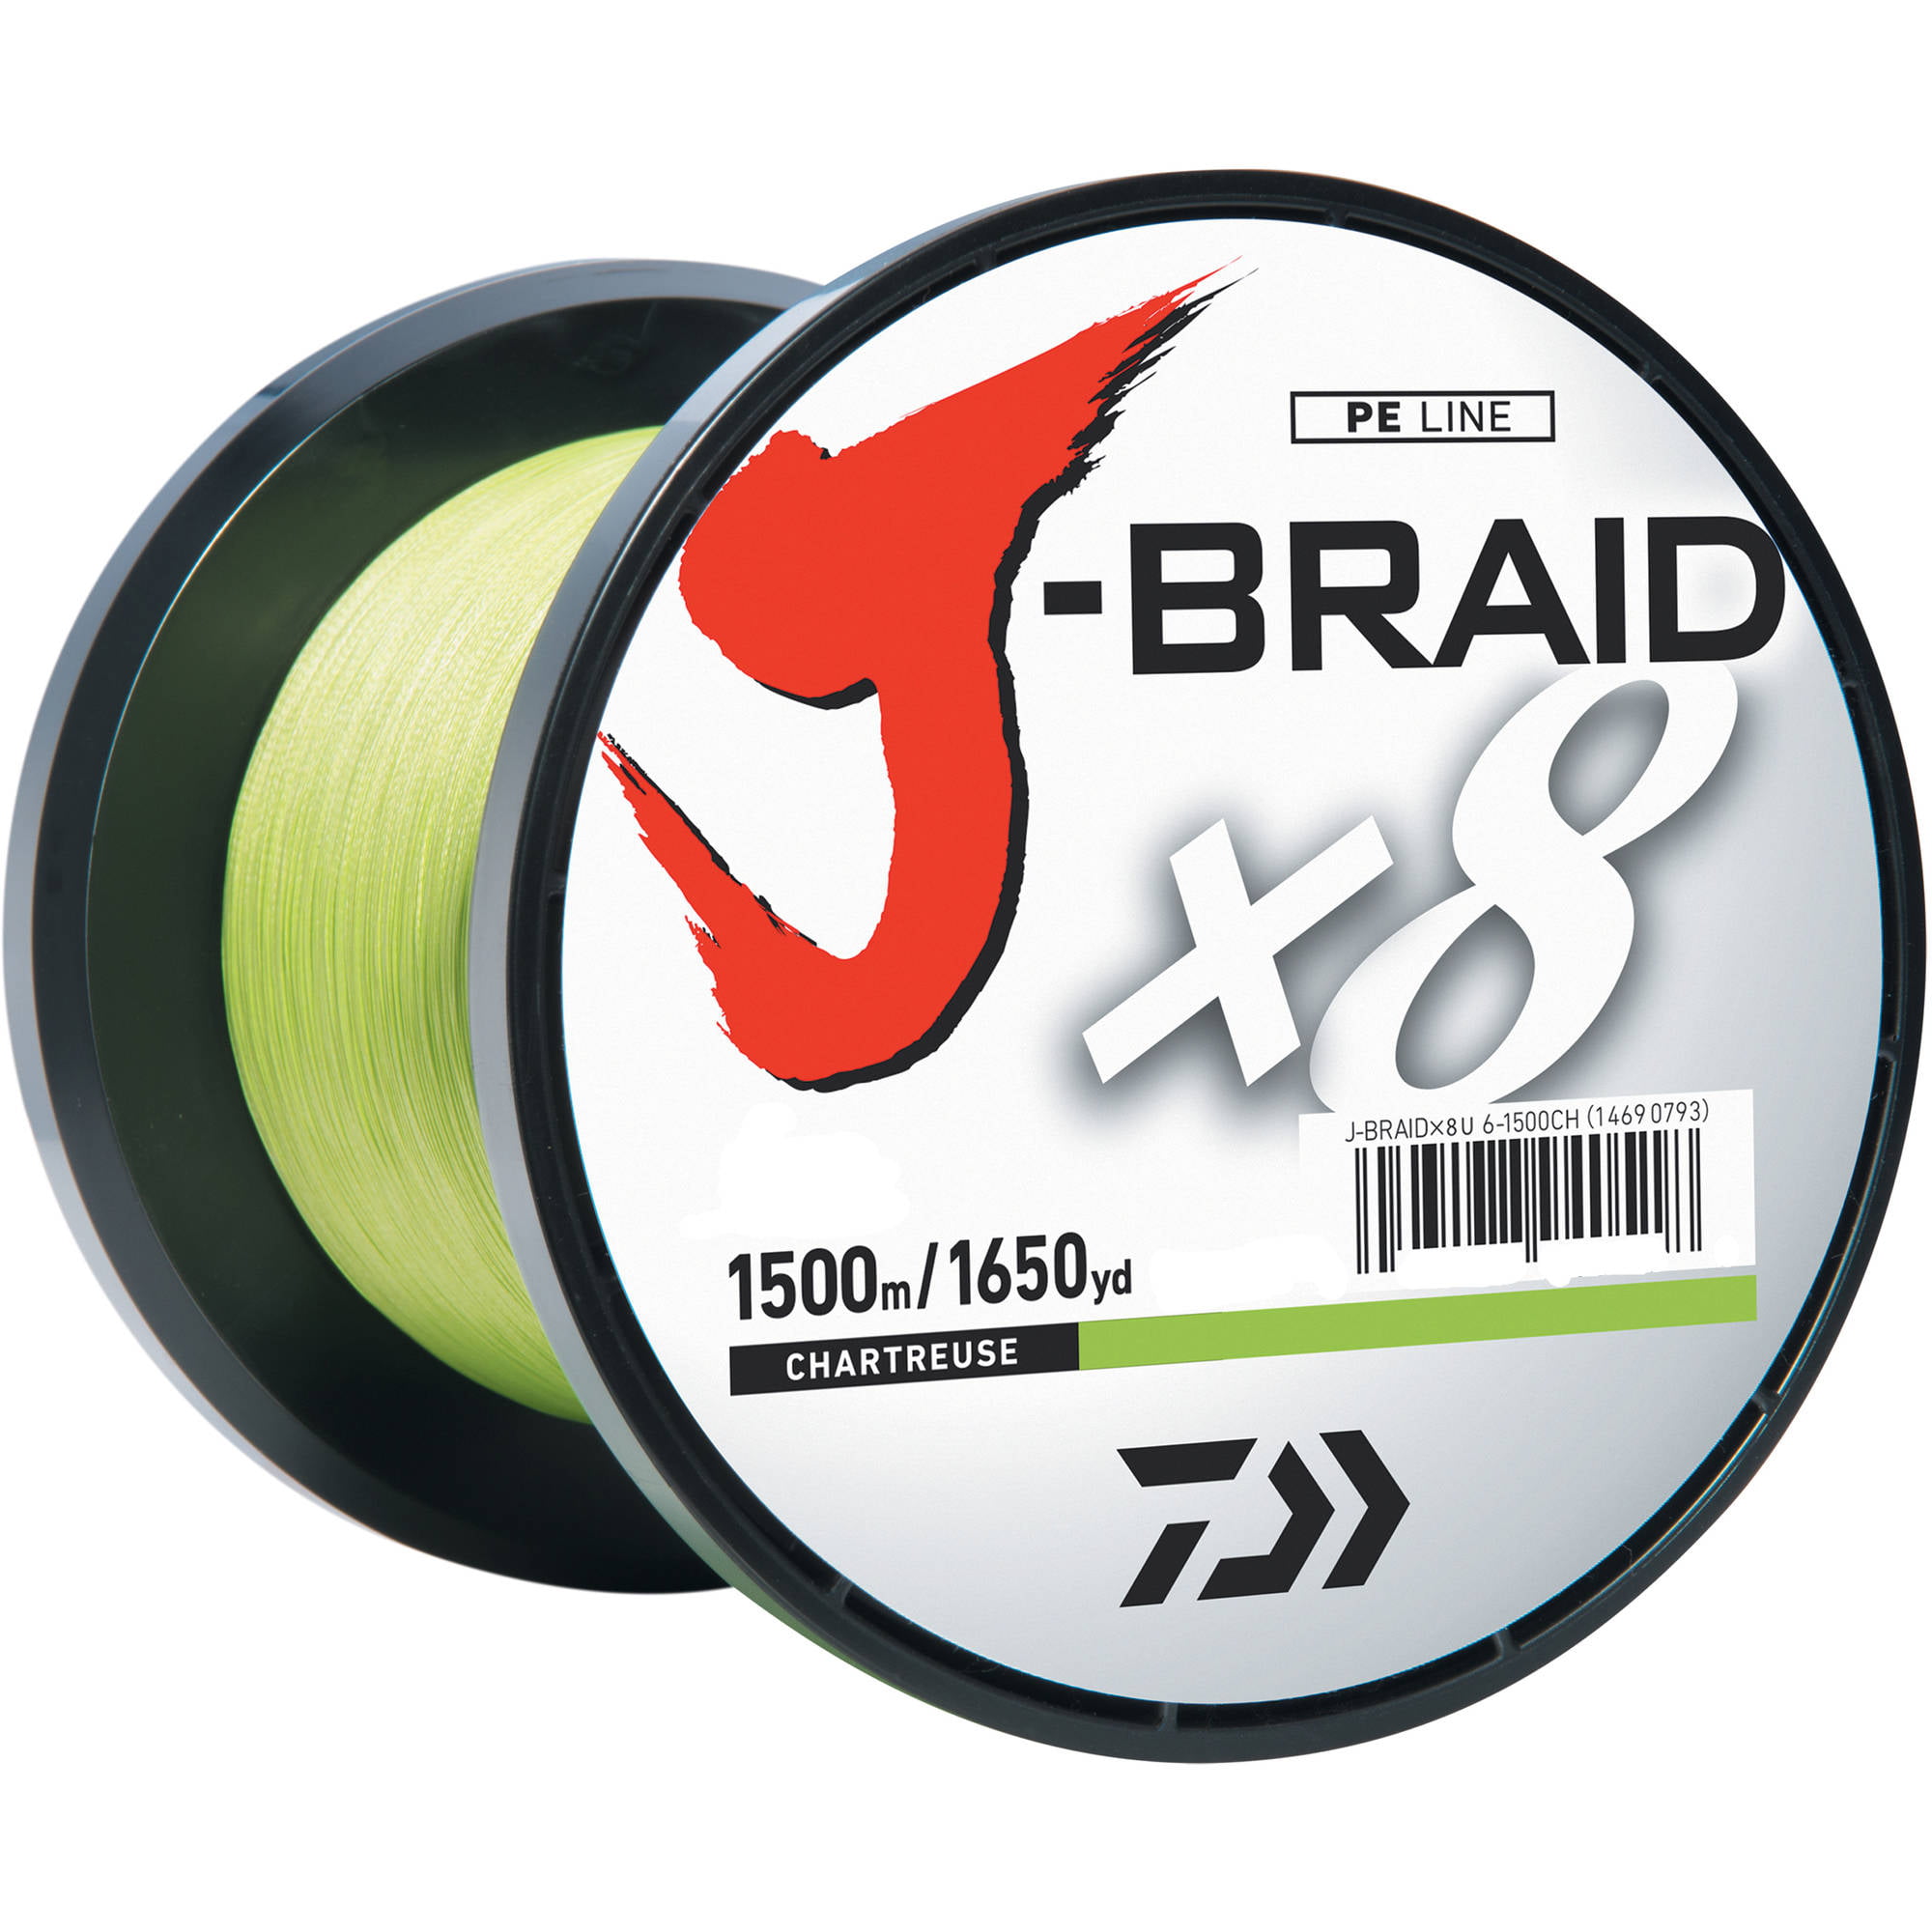 Details about   Braid 8 Strand Braided Line Saltwater 1500M Japan Multifilament PE Braided Line 